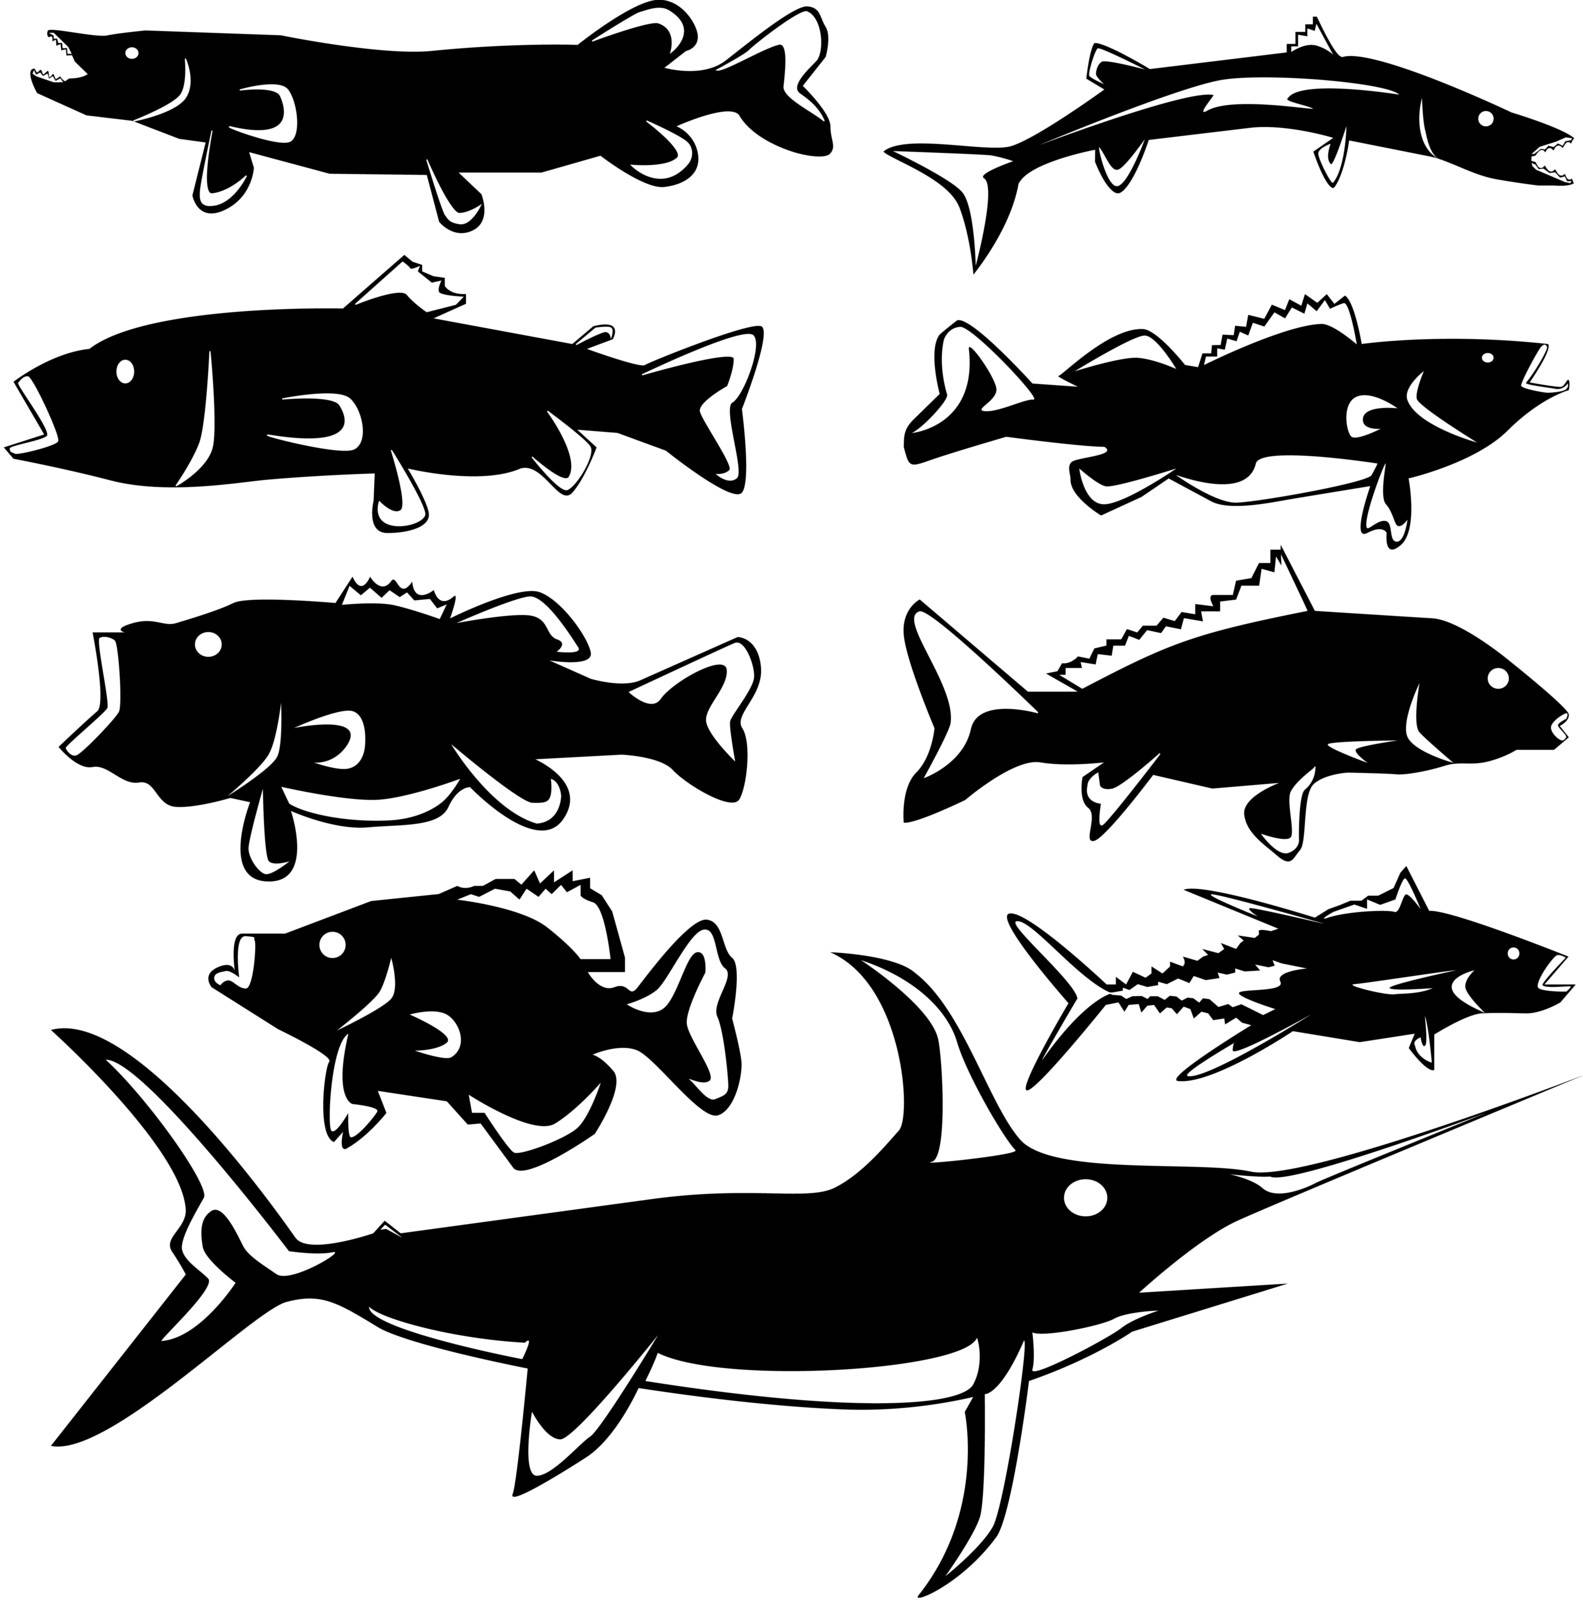 Fish assortment vector silhouettes by lhfgraphics